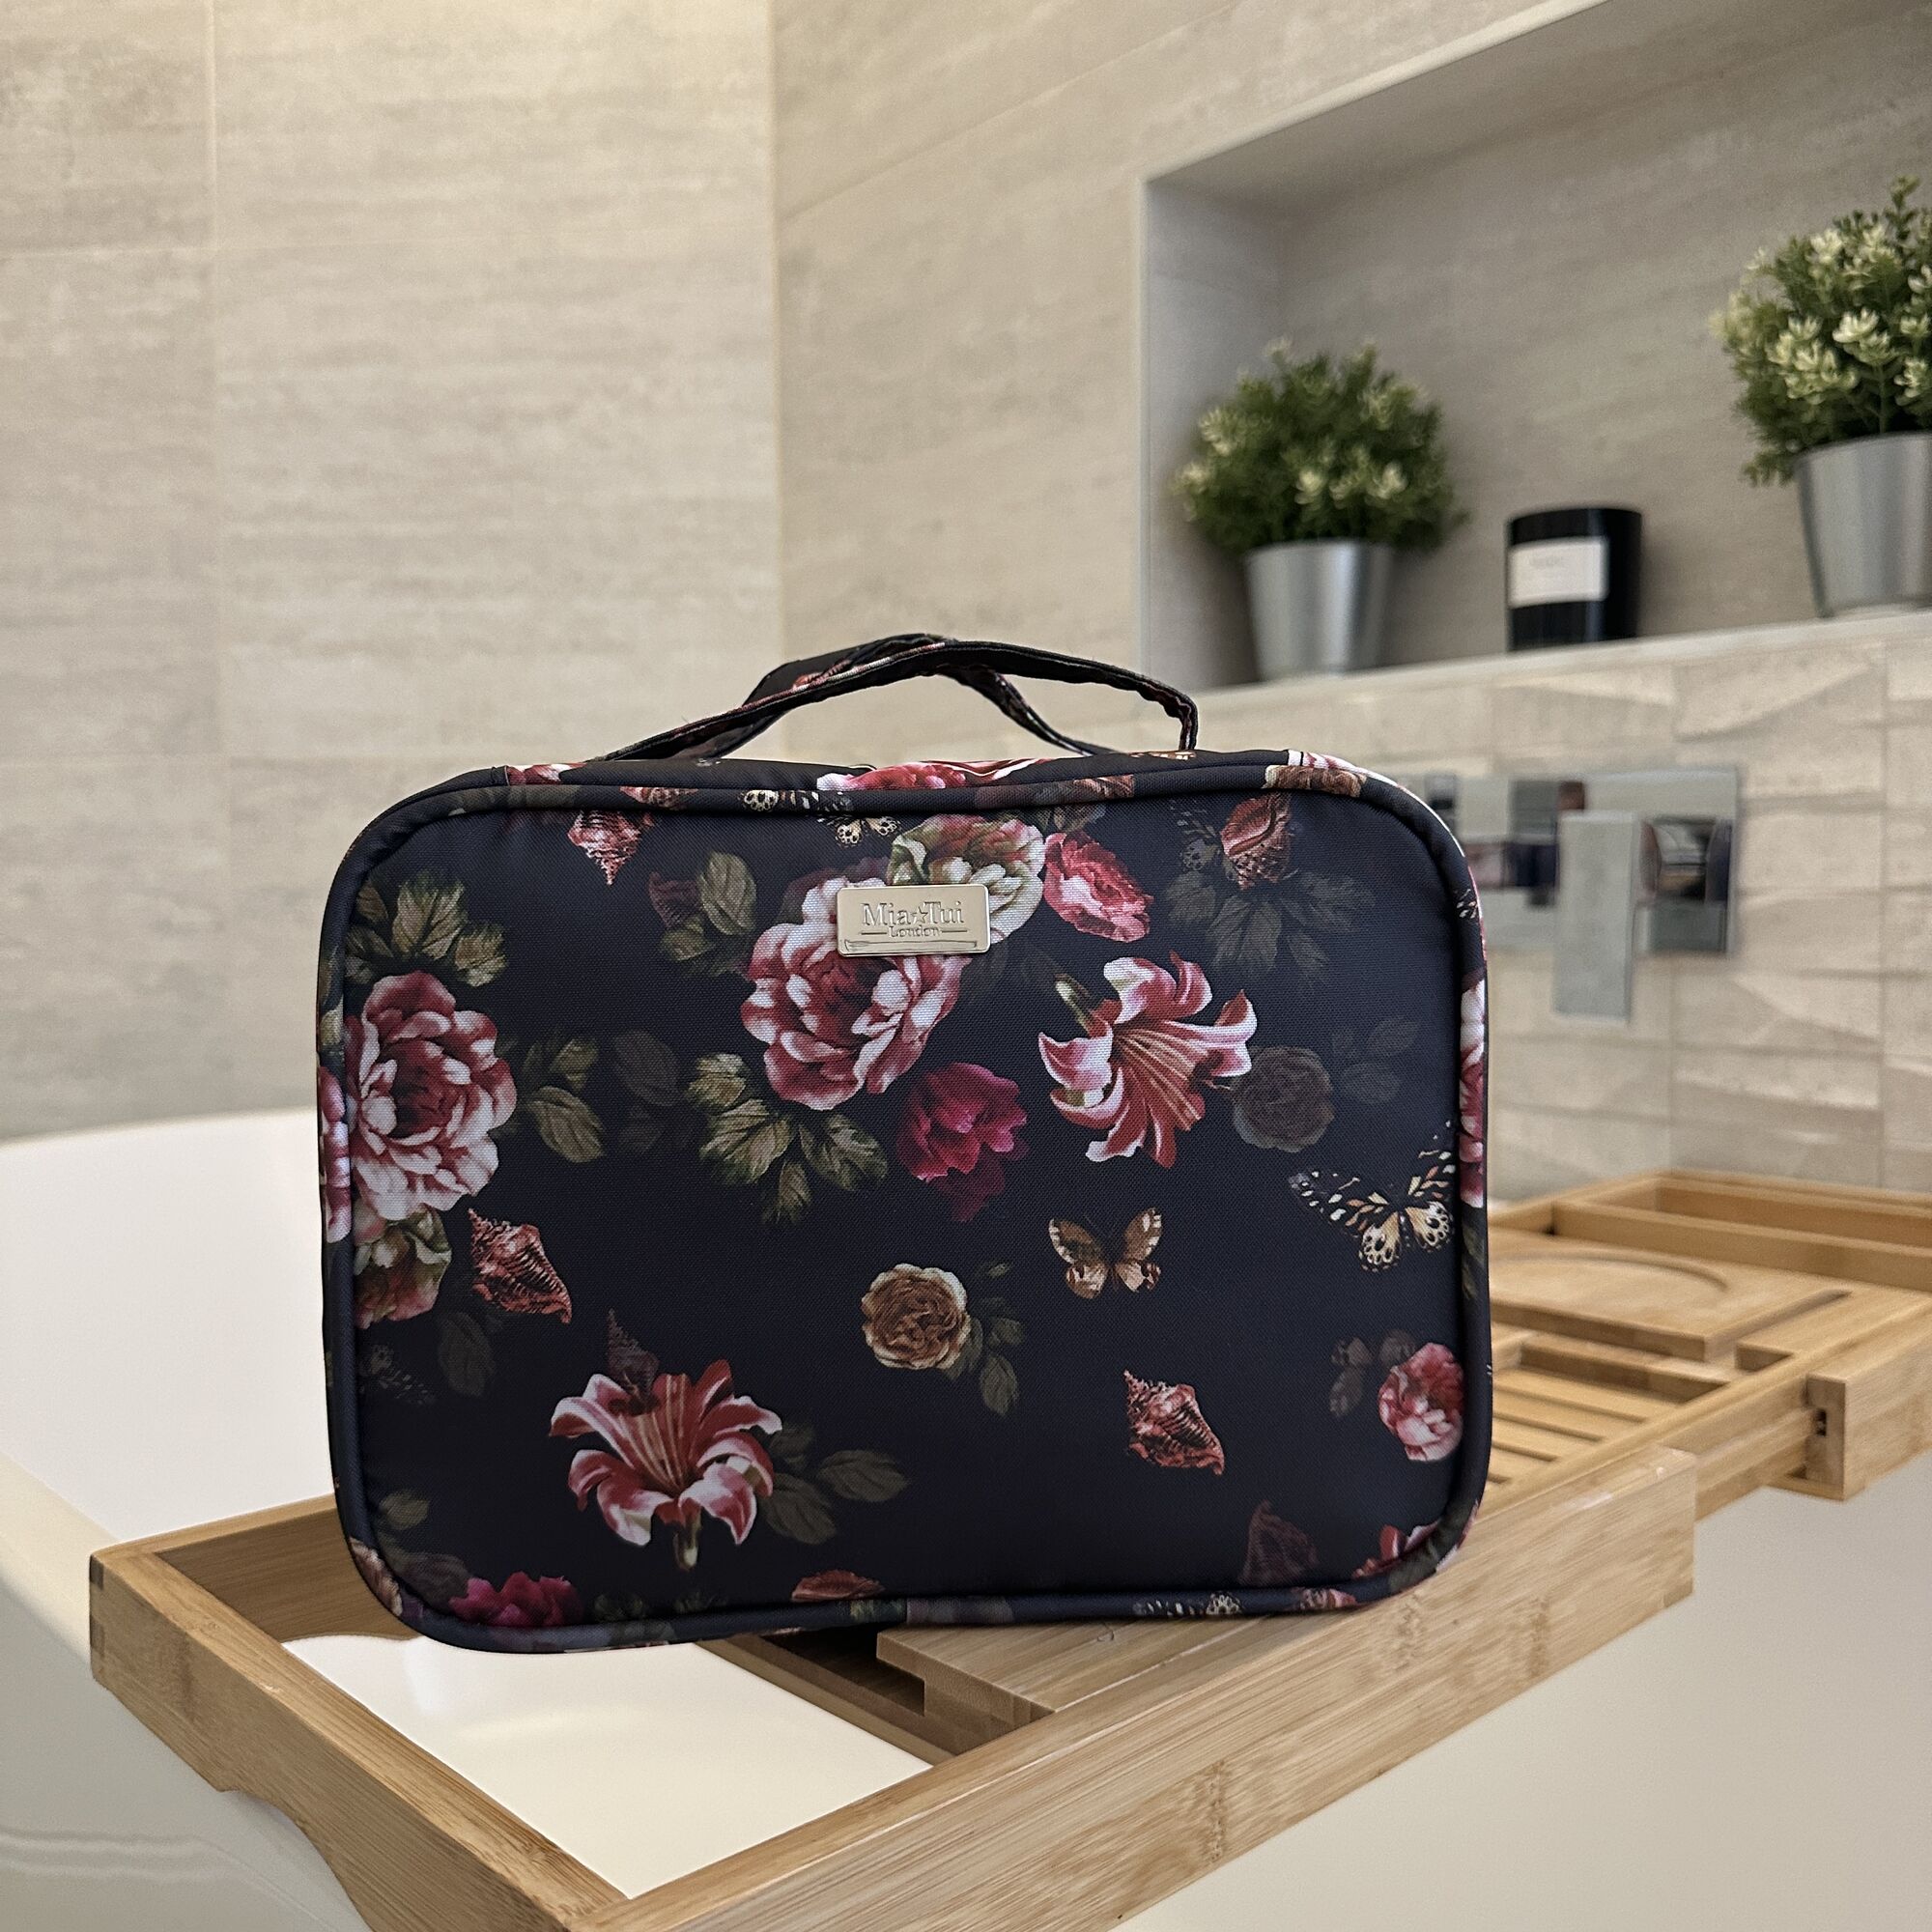 https://miatui.com/collections/toiletry-makeup-bags/products/lou-toiletry-bag